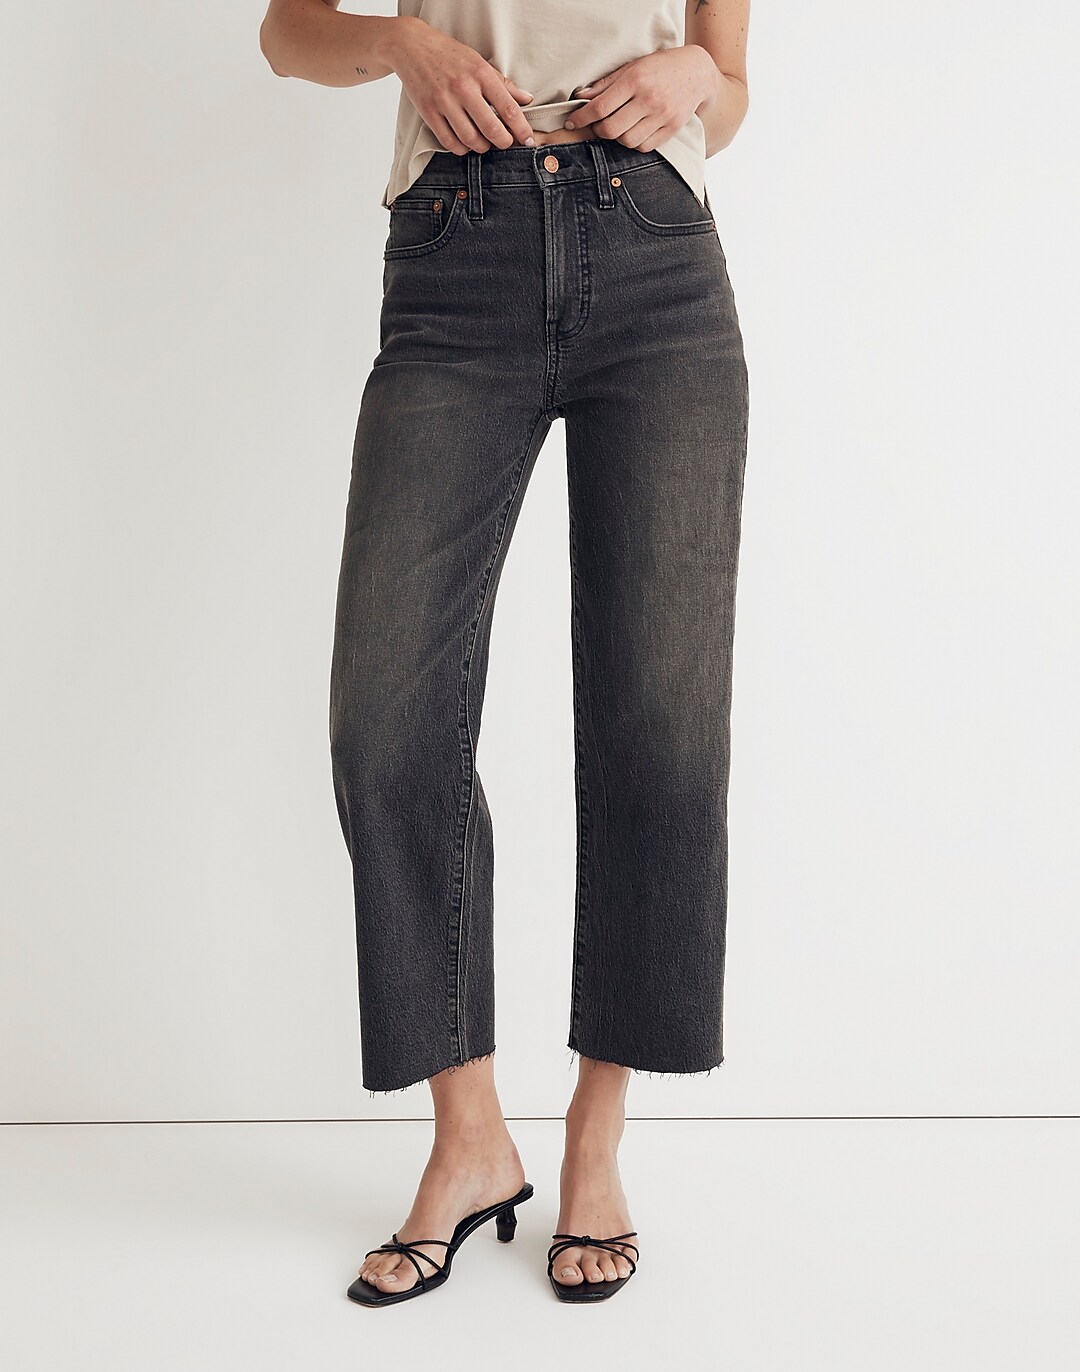 Wide Leg Cropped Jean #wide #leg #jeans #cropped The Wide Leg Jean has made  a comeback (and we're living…